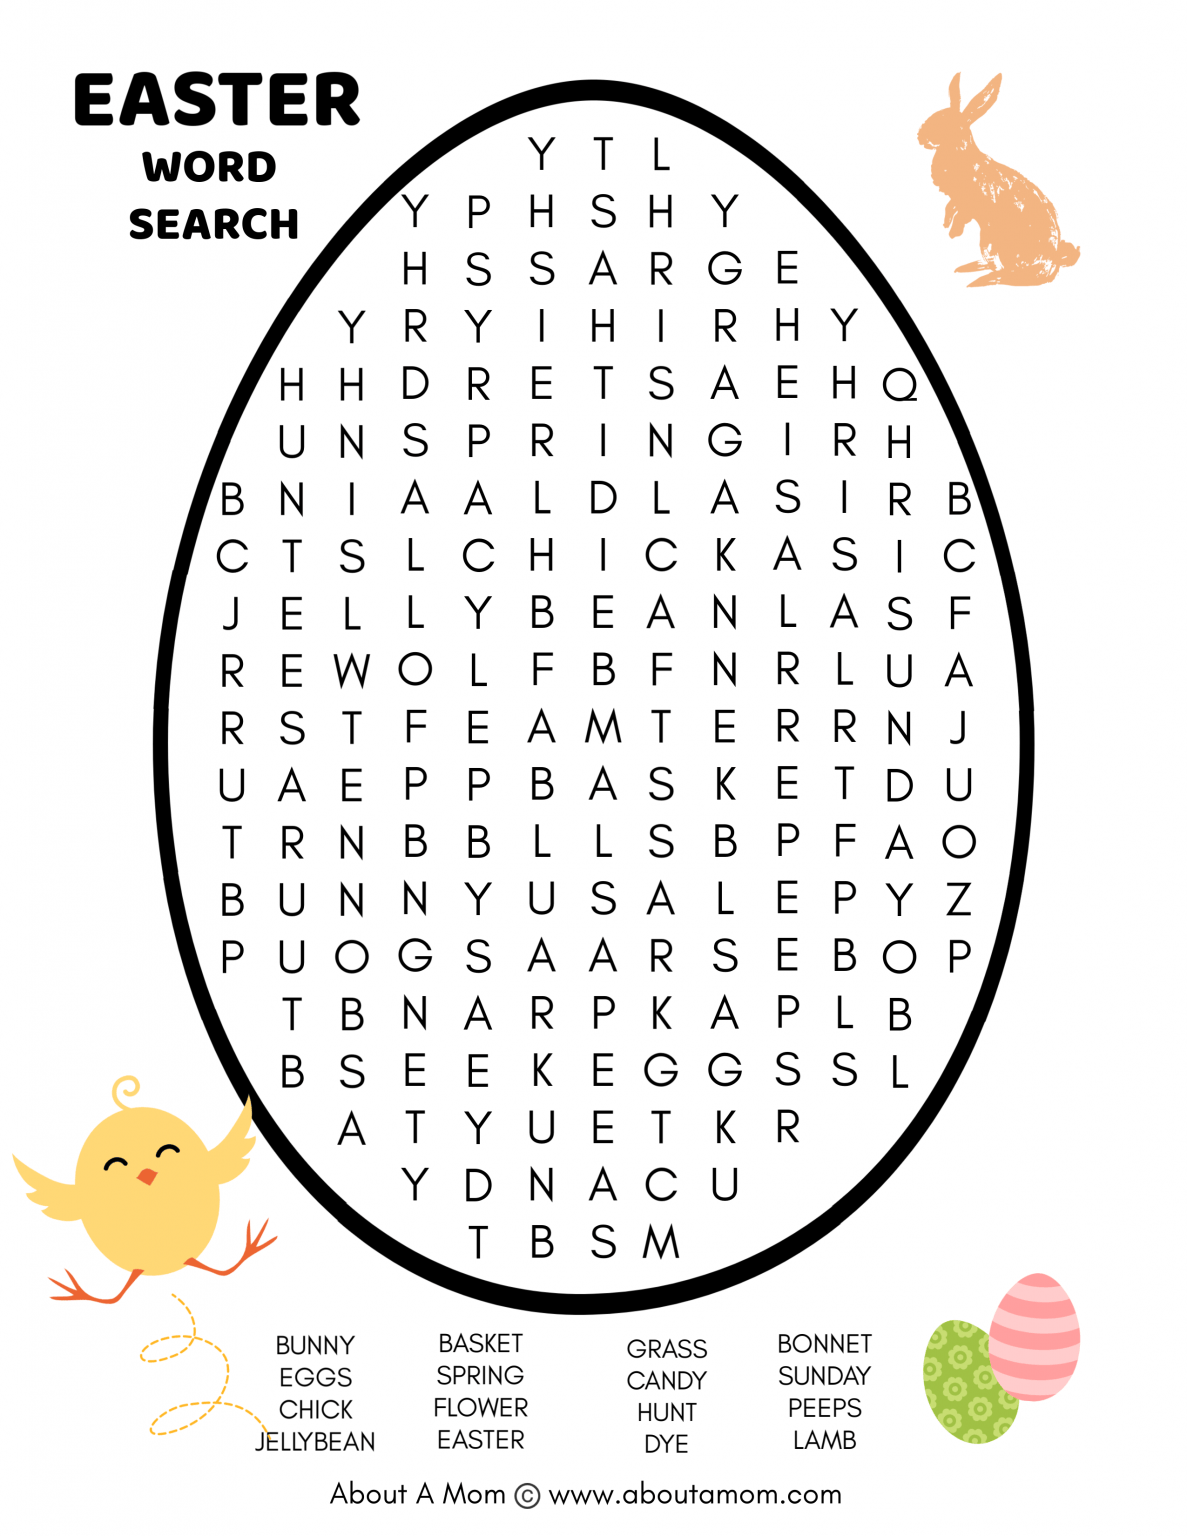 free-easter-word-search-printable-about-a-mom